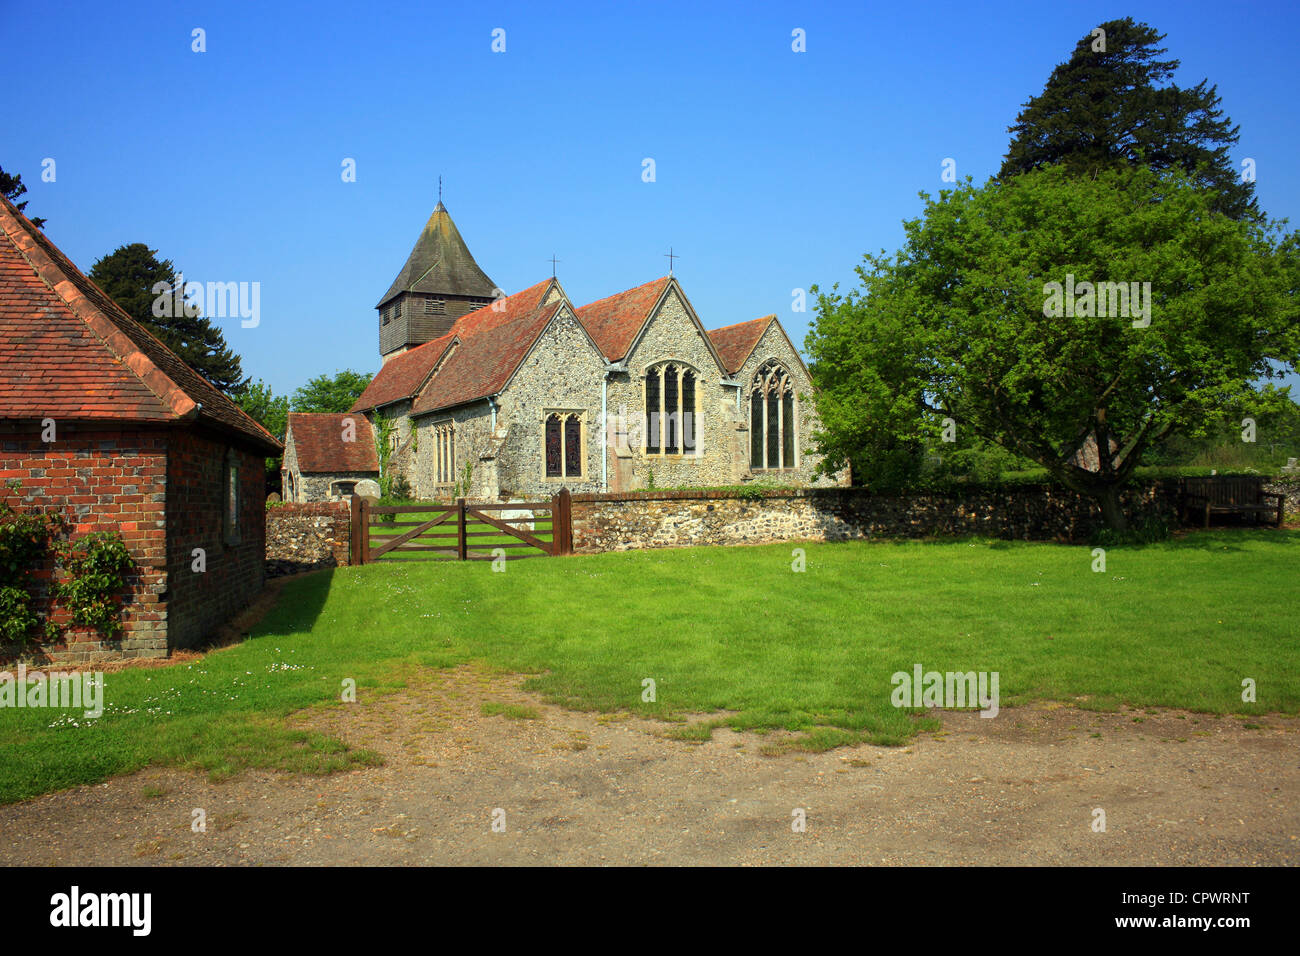 St James the Great church, Elmsted, North Downs, Ashford, Kent, England Stock Photo